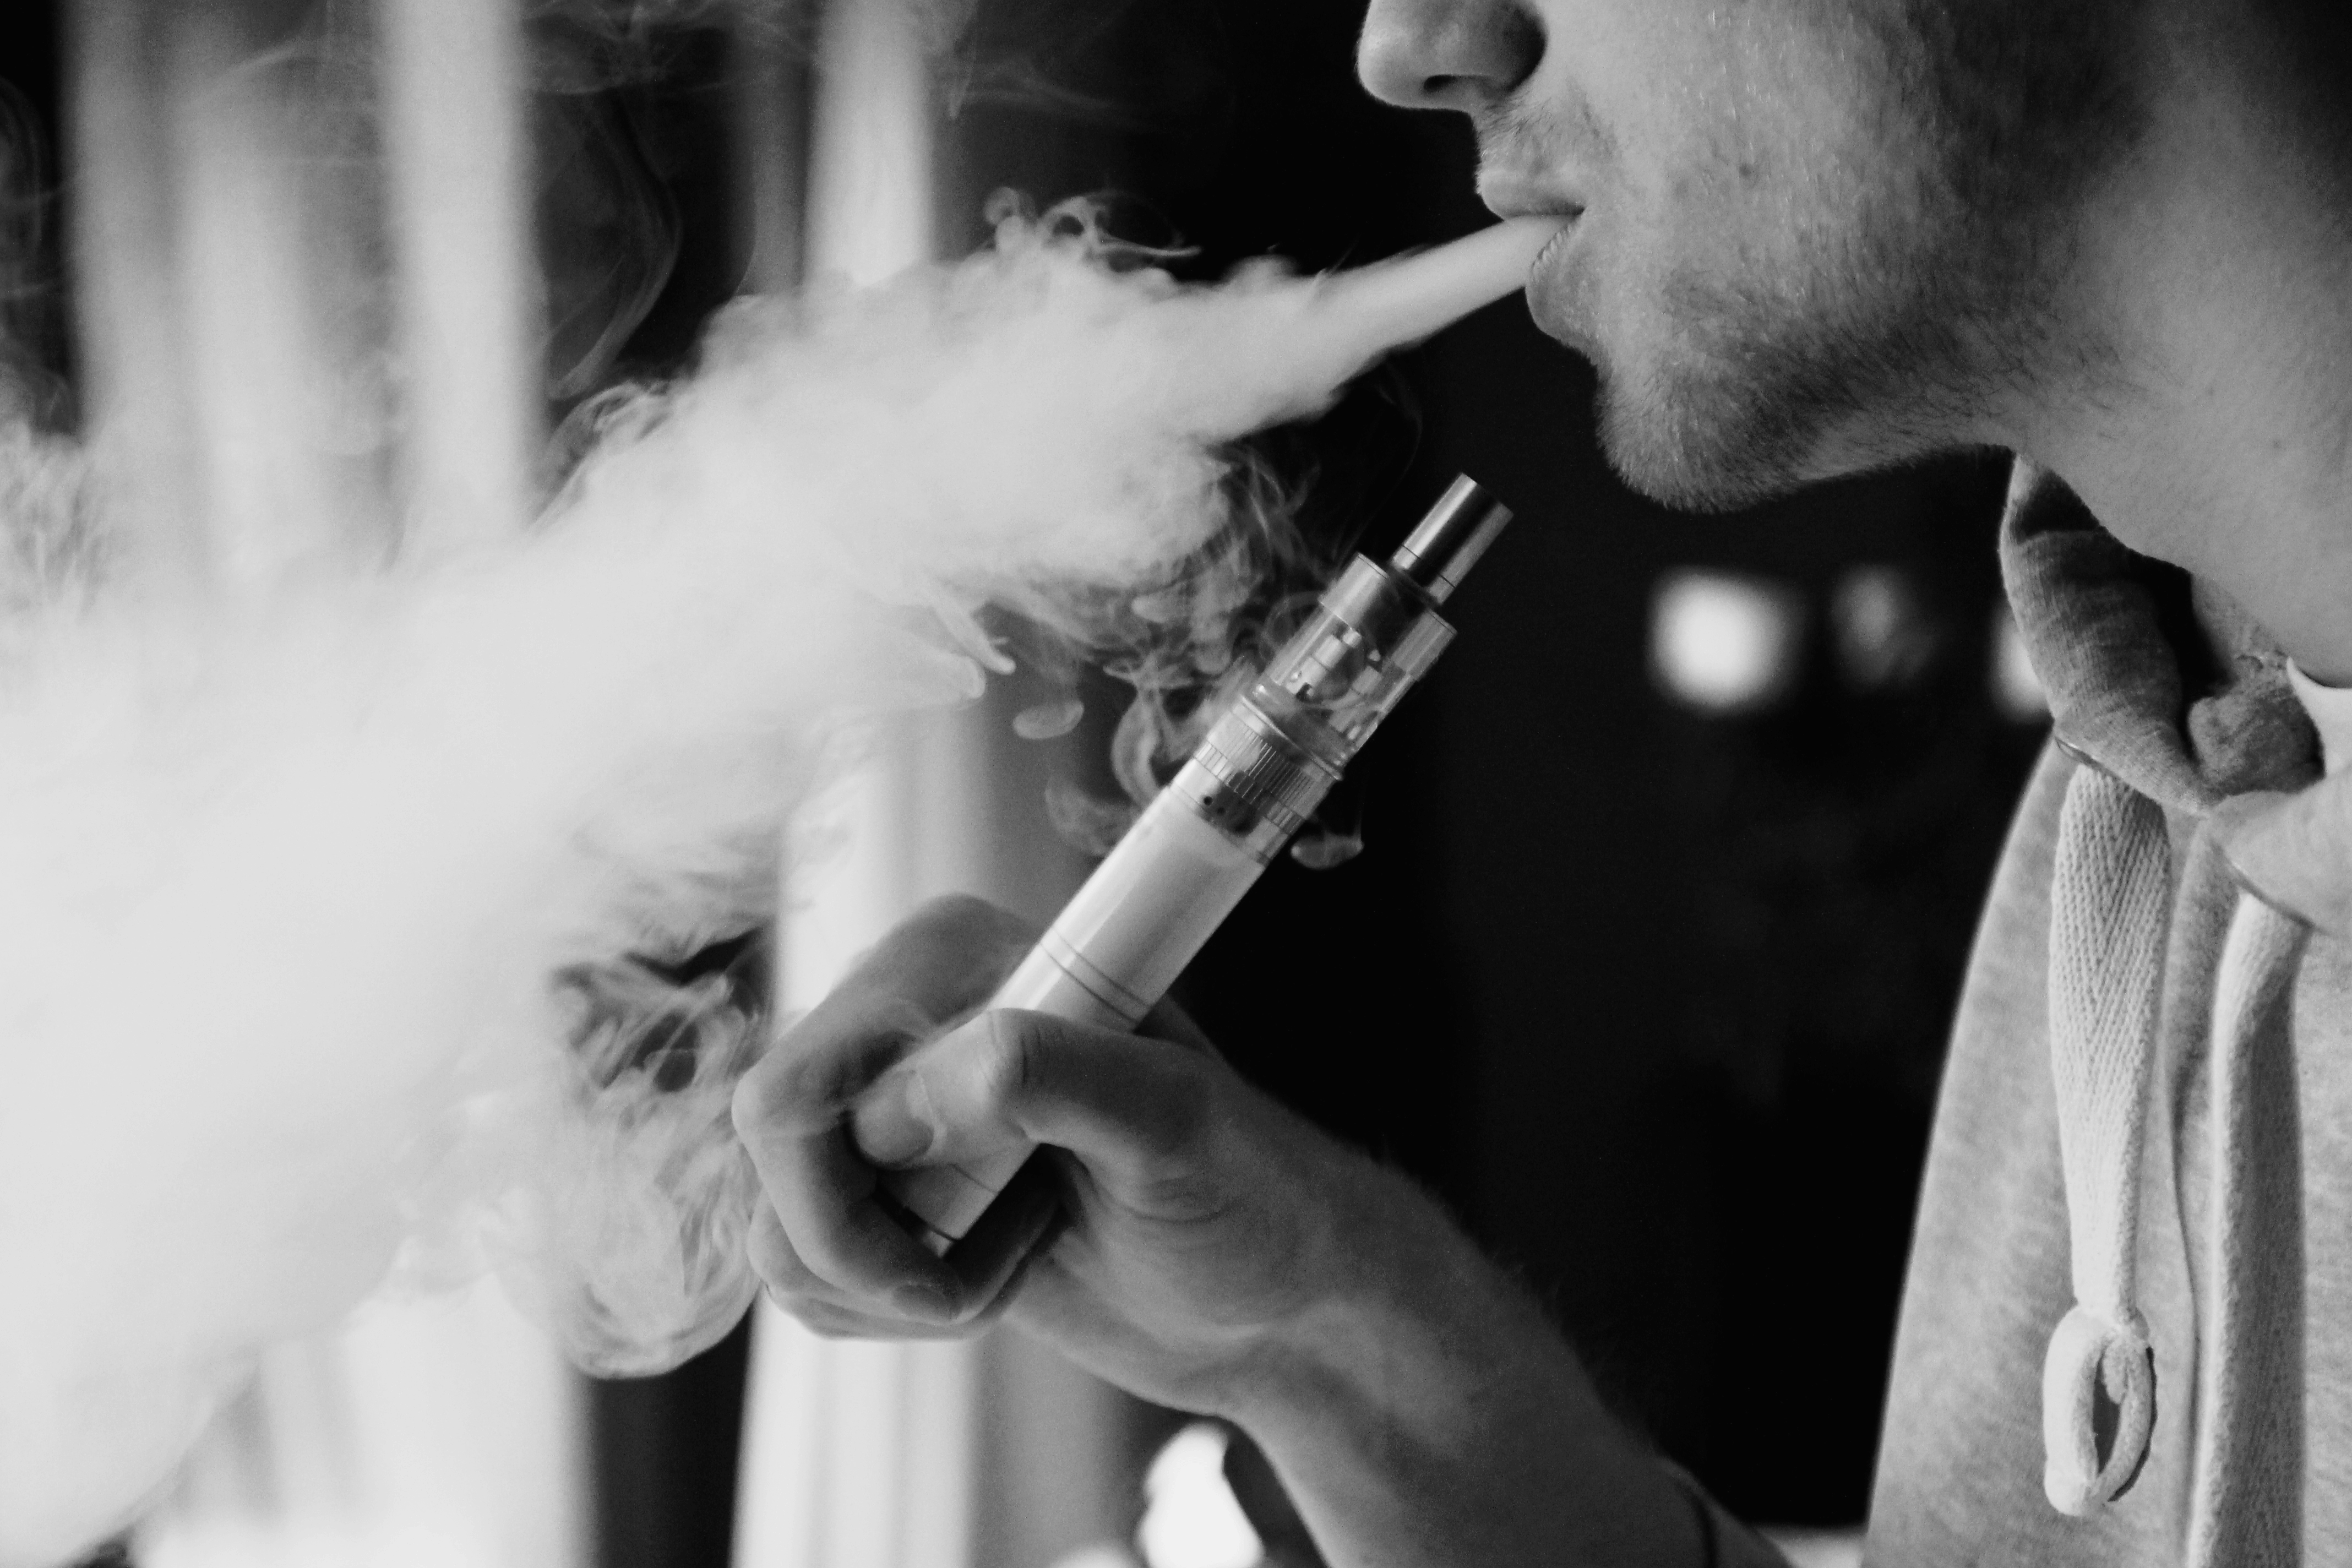 A picture of a young man smoking an e-cigarette.